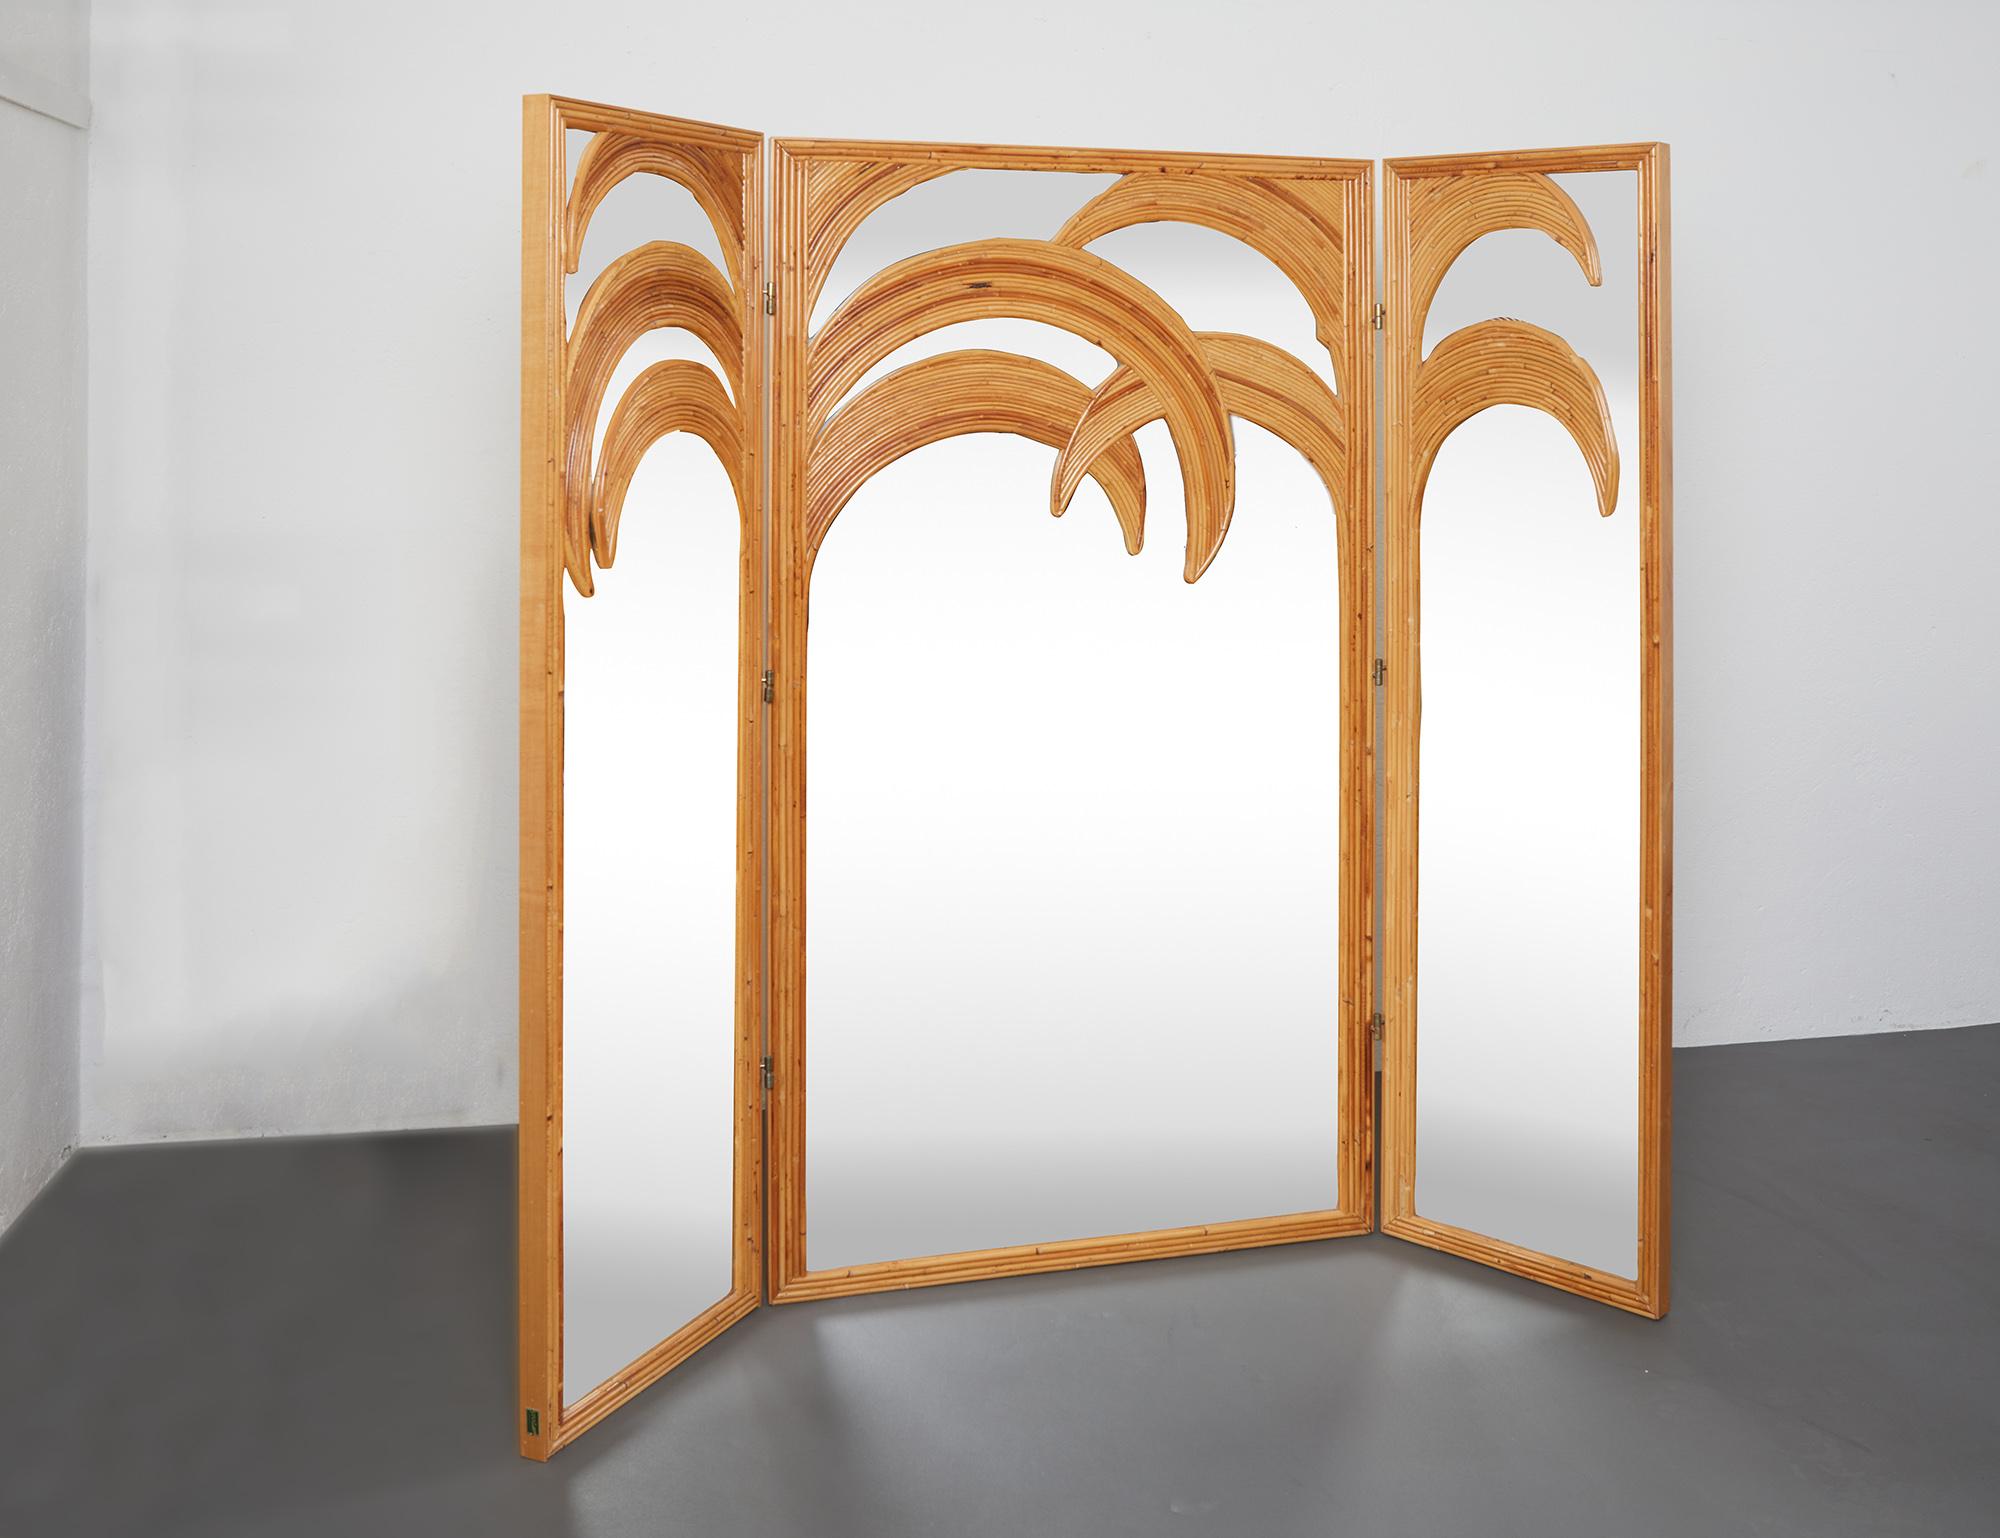 Mid-Century Modern Mirrored Screen or Room Divider by Vivai del Sud, Italy 1970